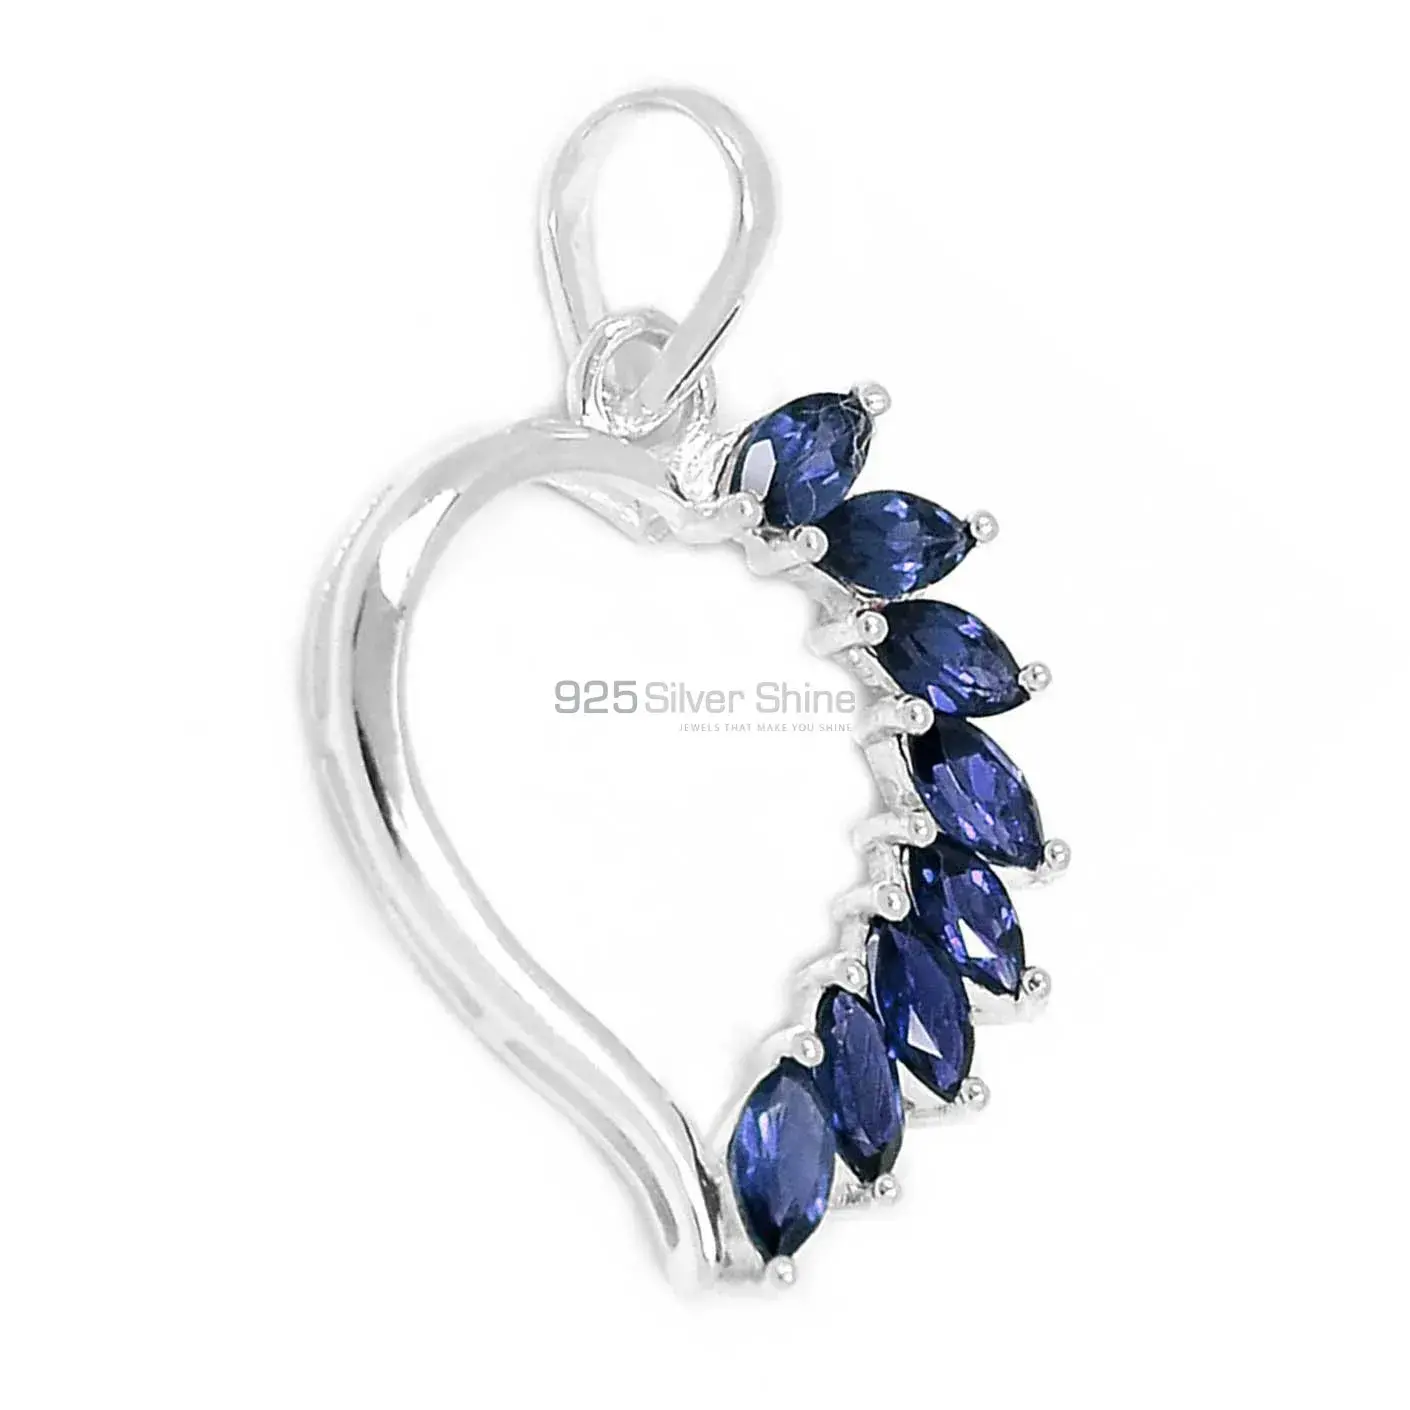 High Quality 925 Fine Silver Pendants Suppliers In Iolite Gemstone Jewelry 925SSP304-3_0